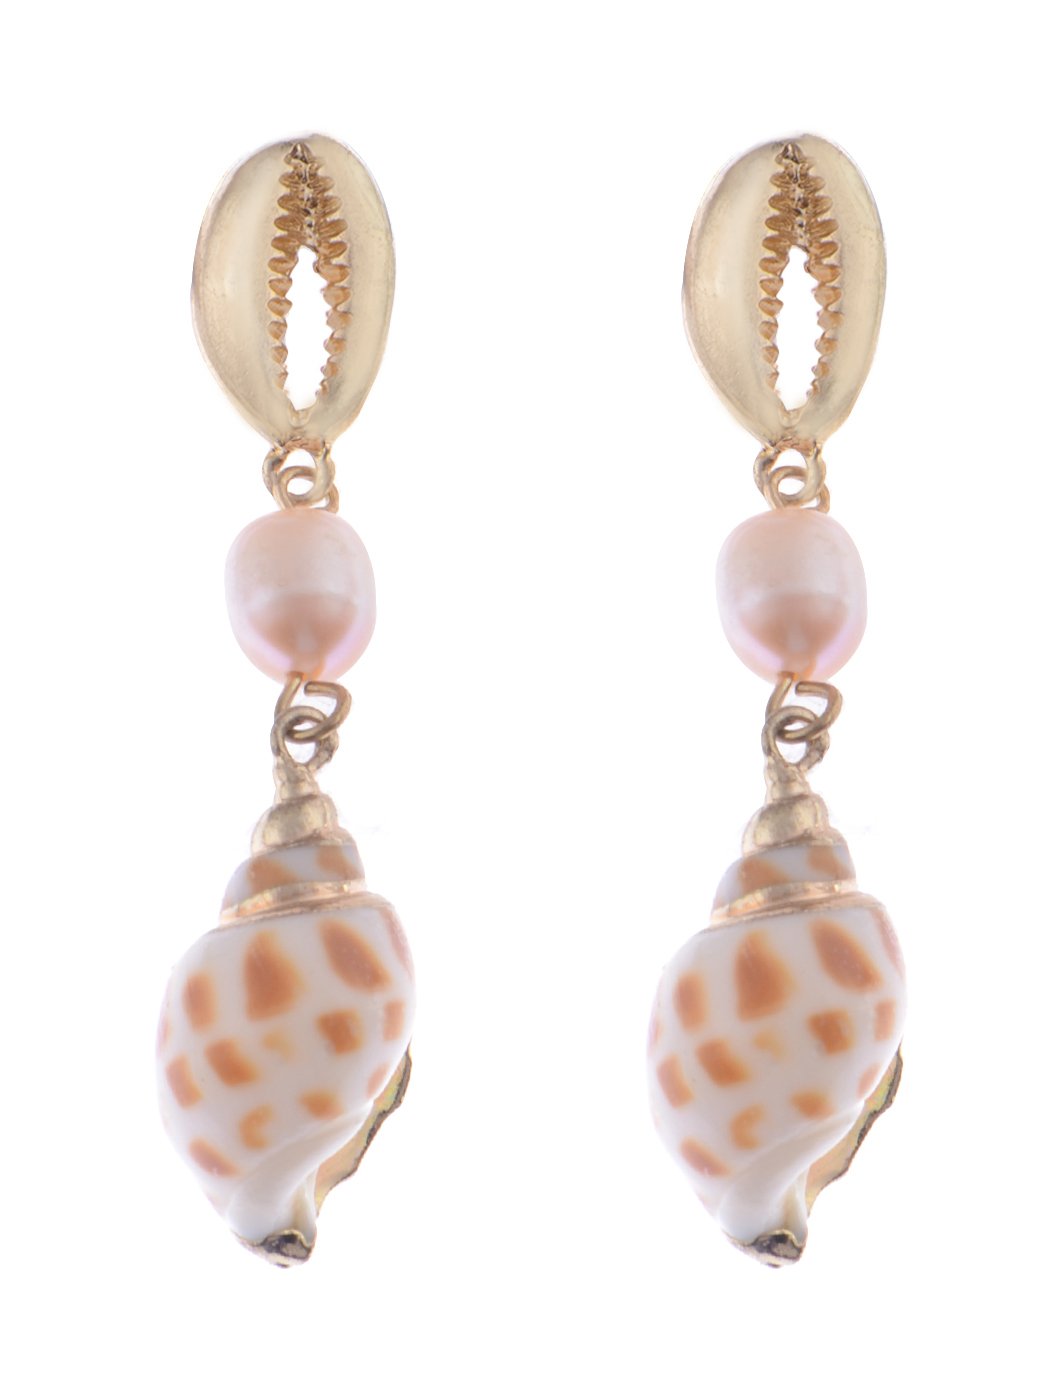 Studded Gold D Casual Conch Seashell Pearl Charm Dangle Drop Trendy Holiday Earrings